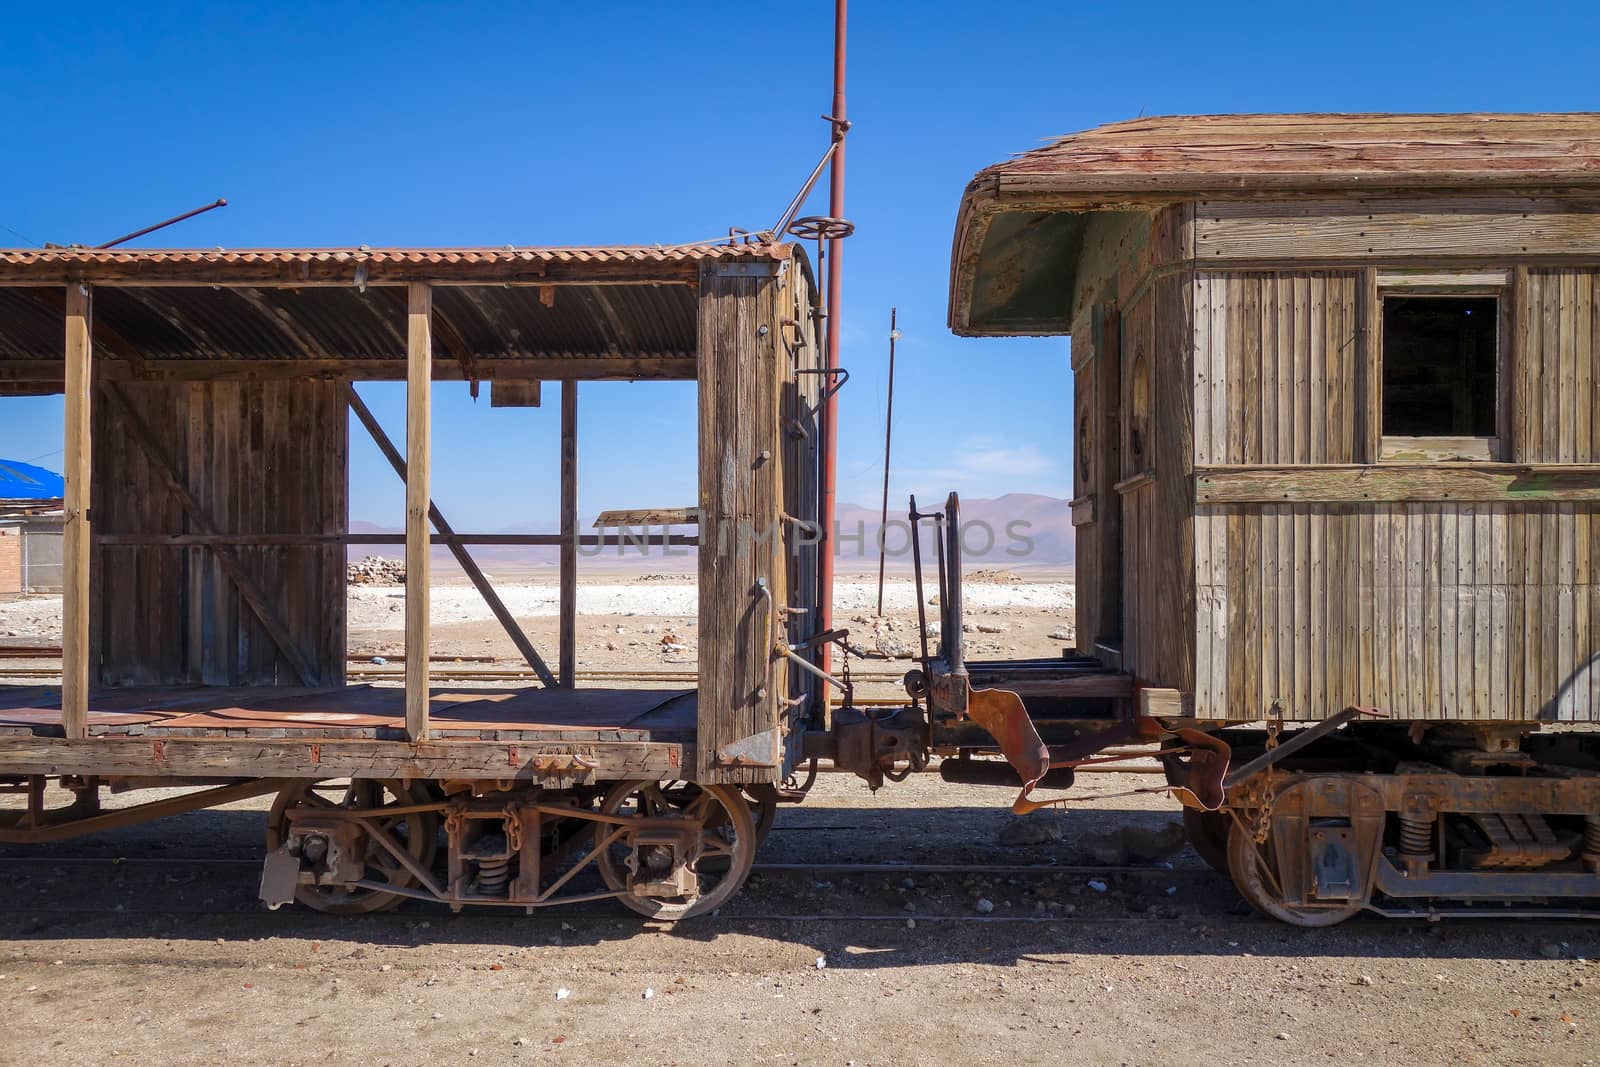 Old train station in Bolivia desert by daboost